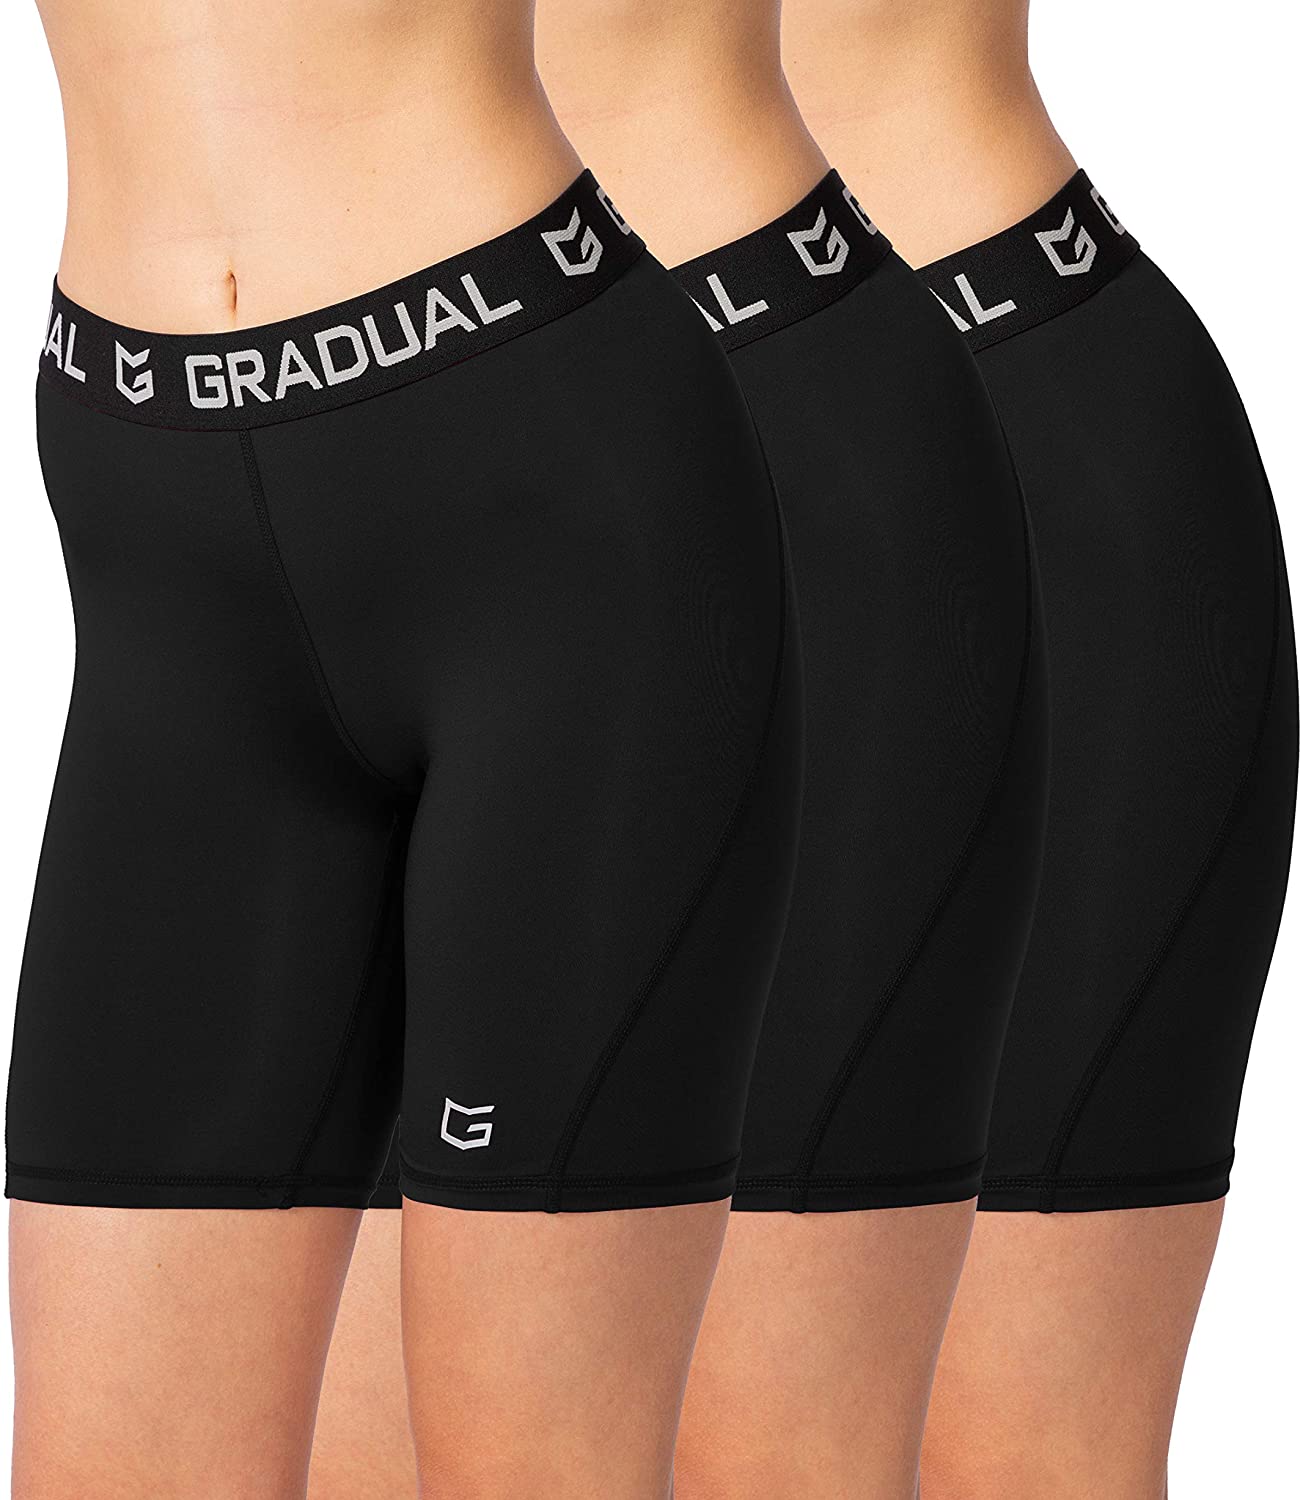 G Gradual Women's Spandex Compression Volleyball Shorts 3 /7 Workout Pro Shorts for Women